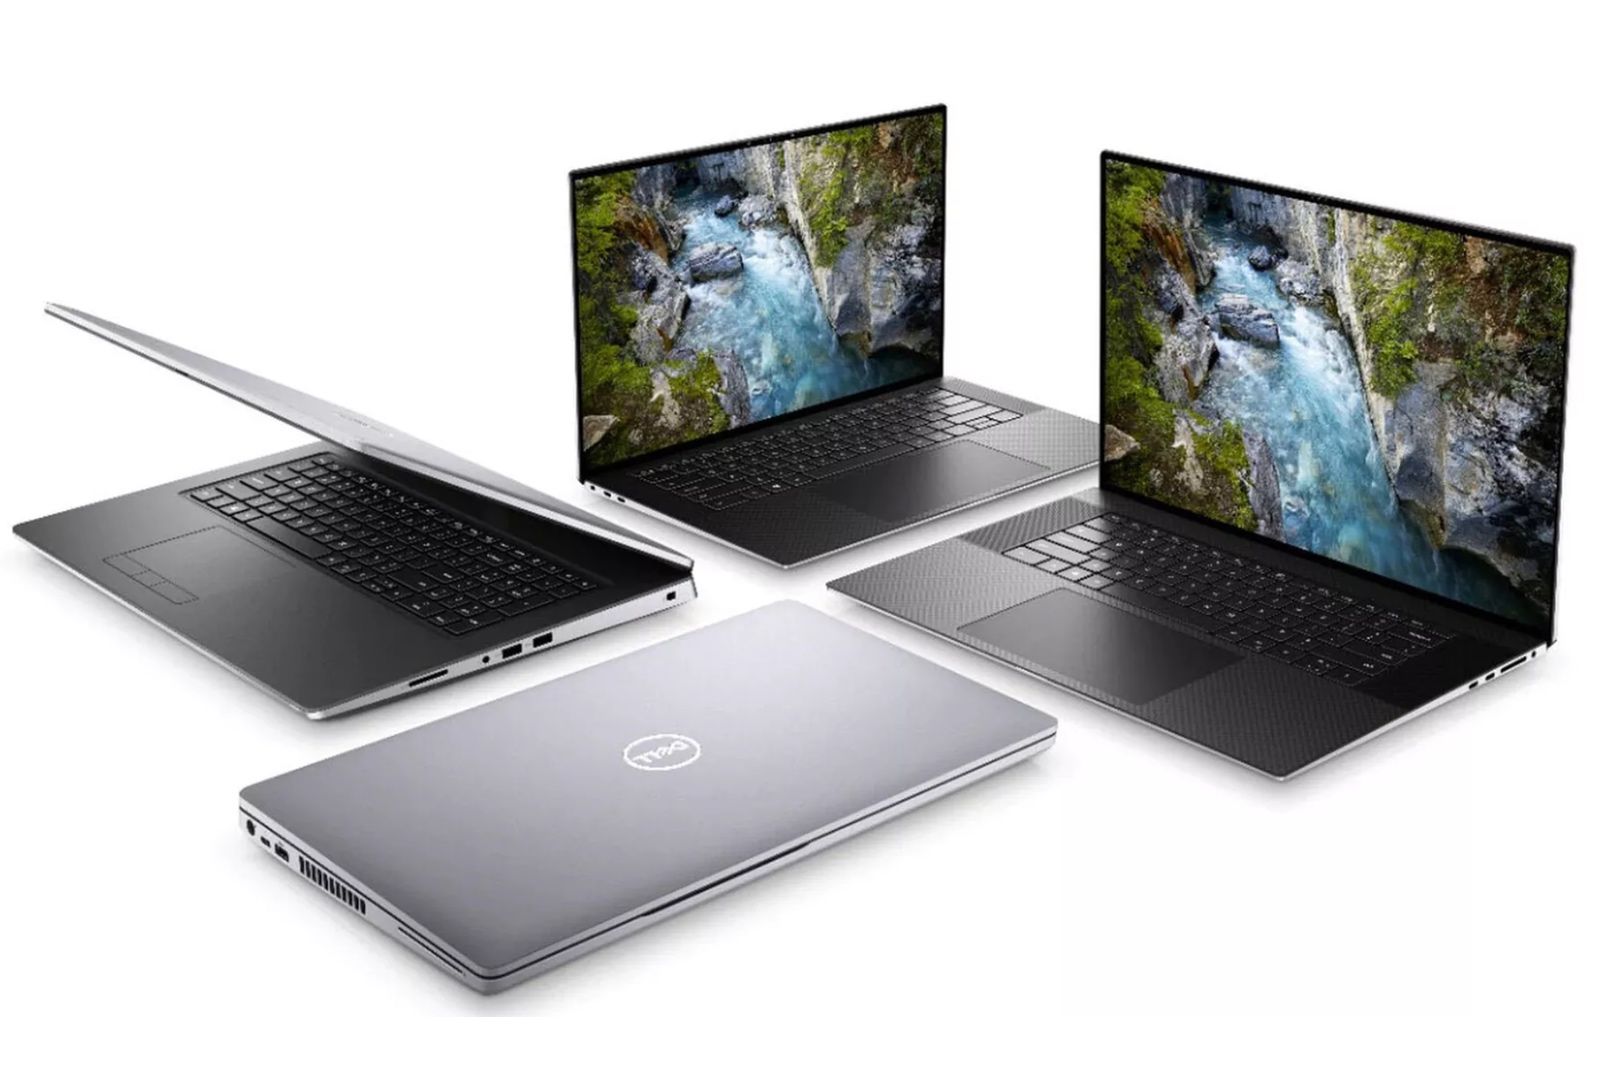 Dell may have just leaked images of the XPS 15 and XPS 17 refreshes image 1